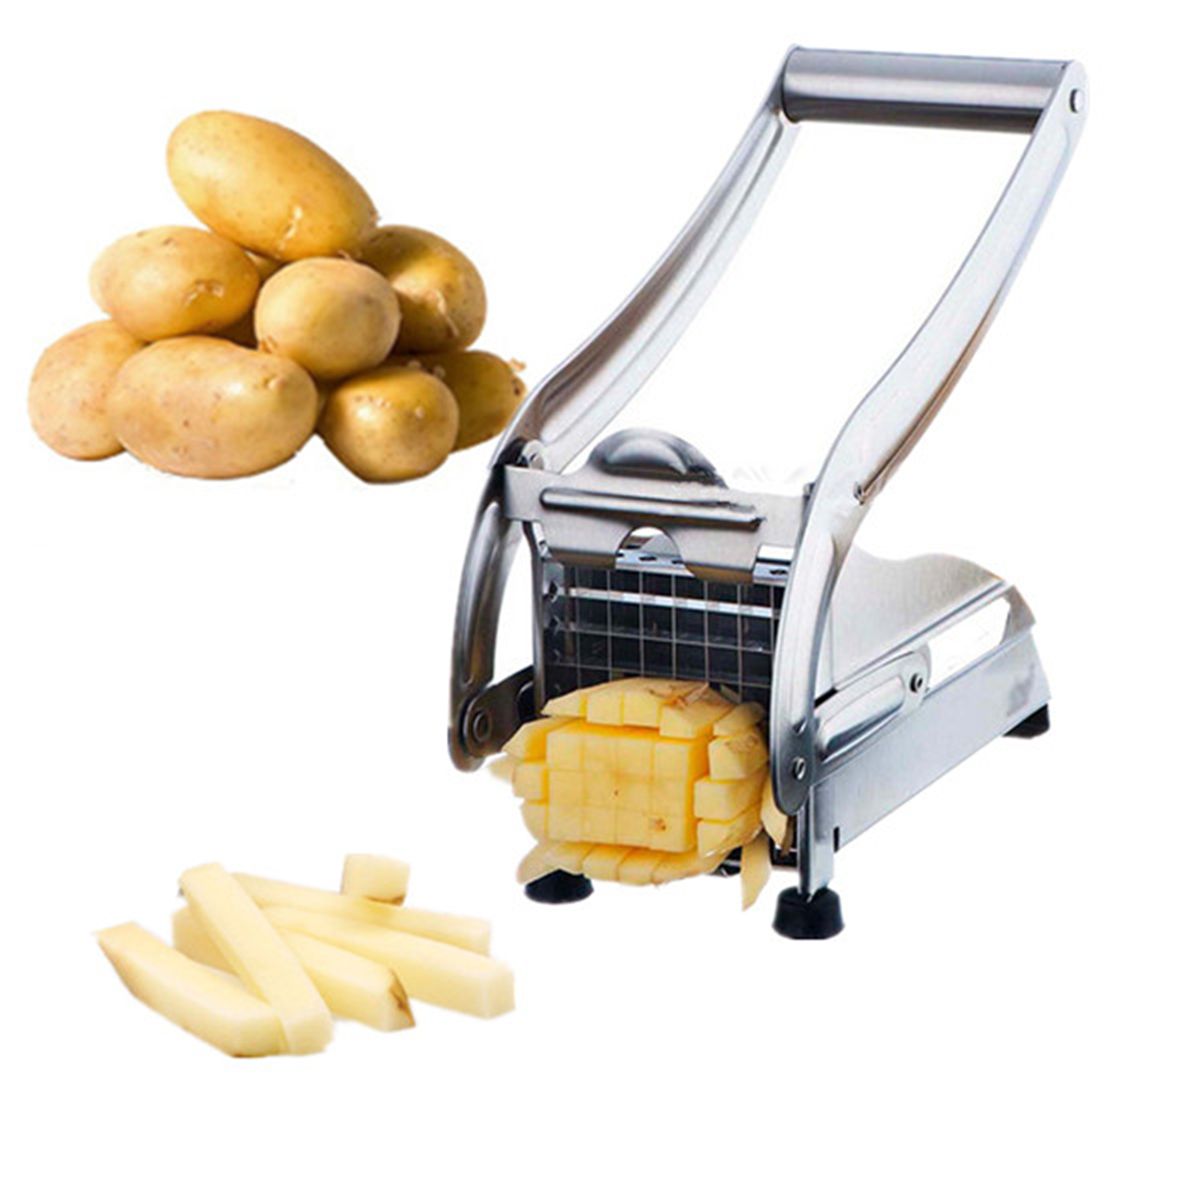 Stainless-Steel-French-Fry-Potato-Cutter-Maker-Slicer-Chopper-Dicer-with-2-Bllades-Vegetable-Cutter-1197223